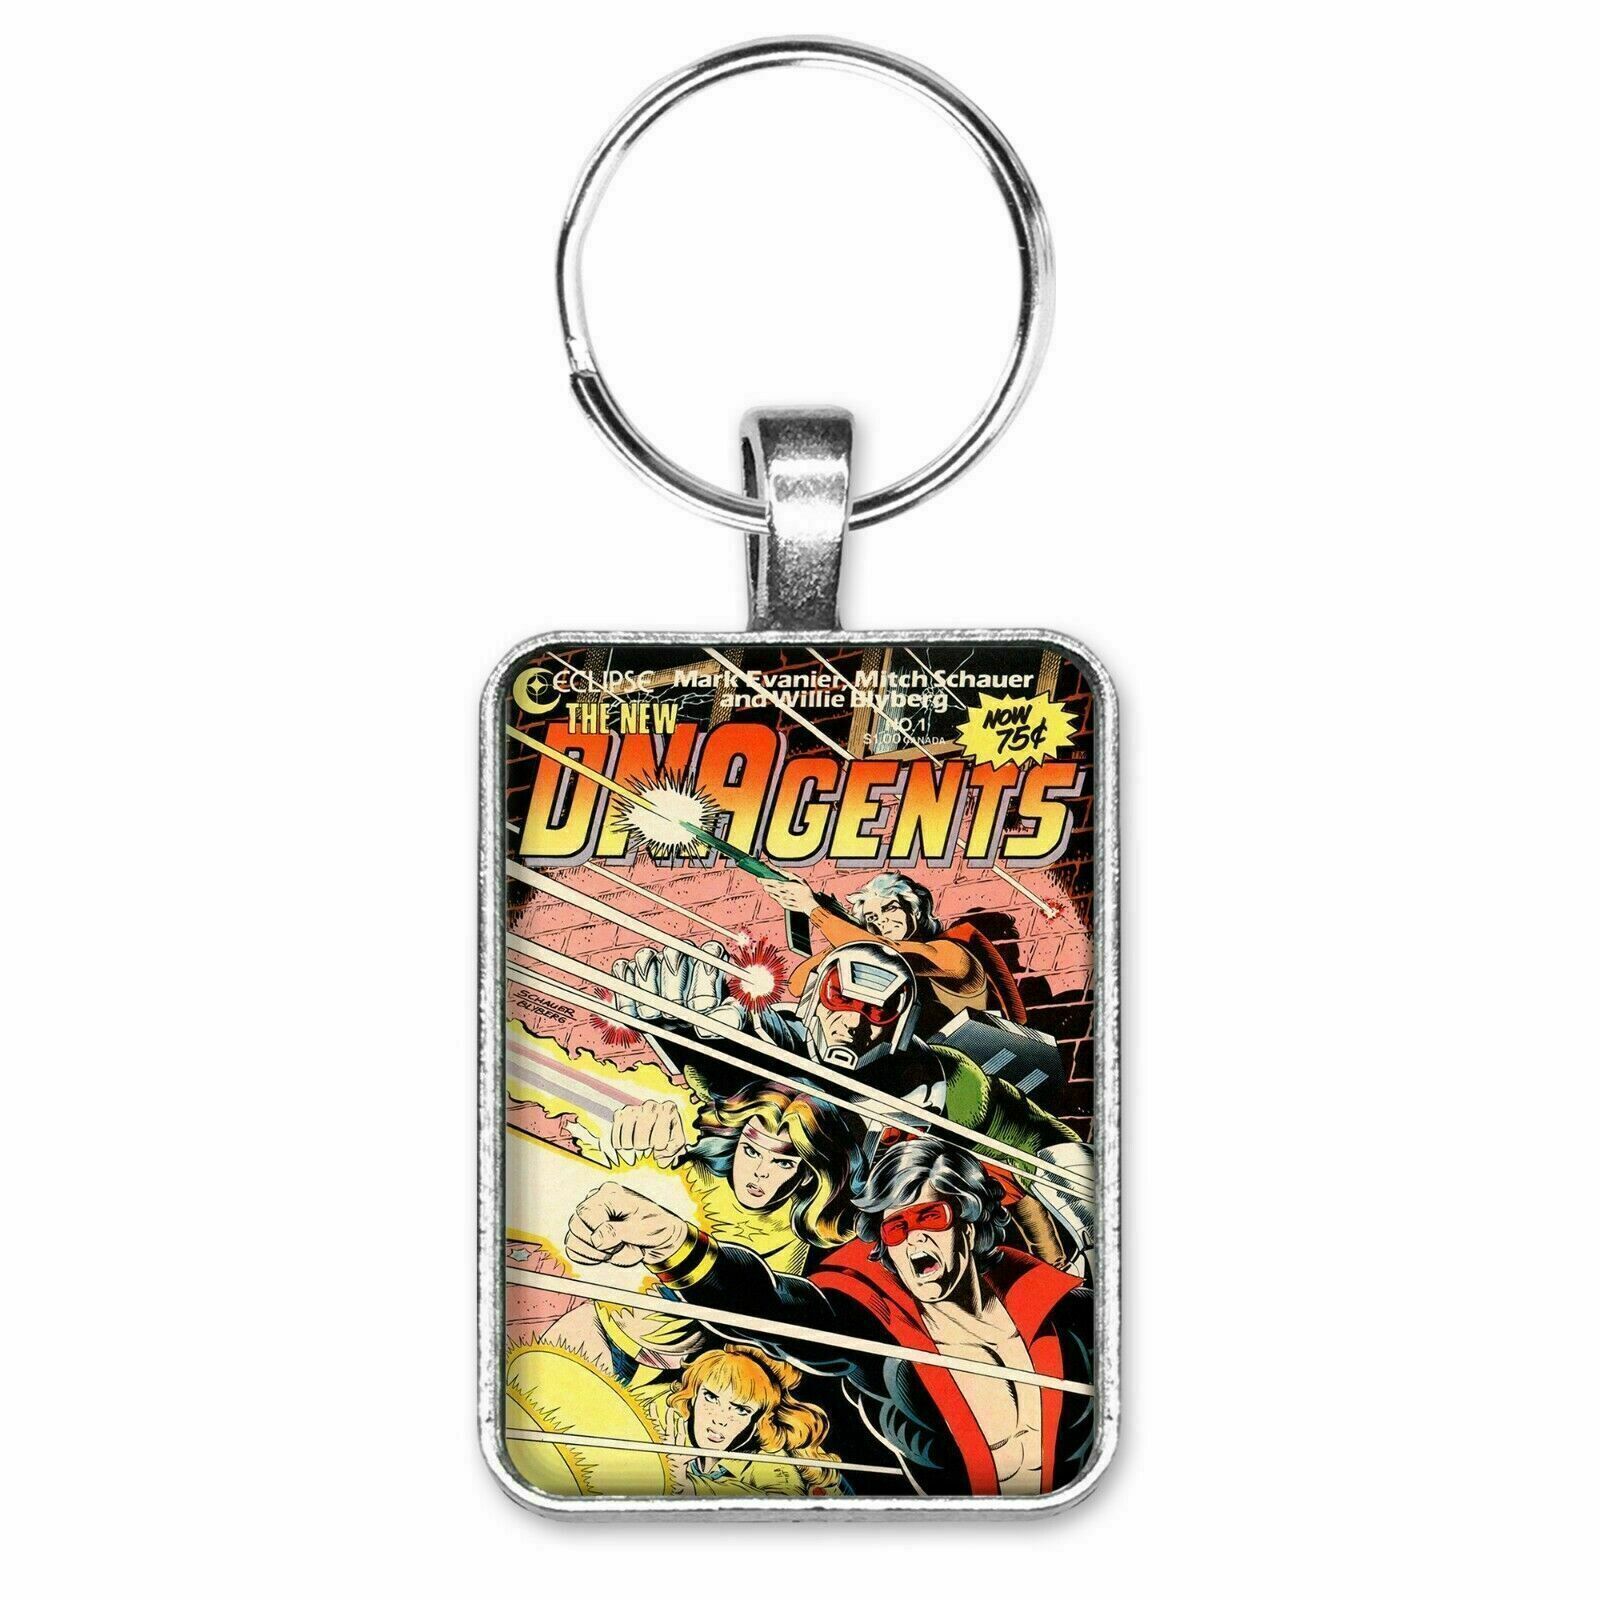 The New DNAgents #1 Cover Key Ring / Necklace Classic Pacific Comic Book Jewelry